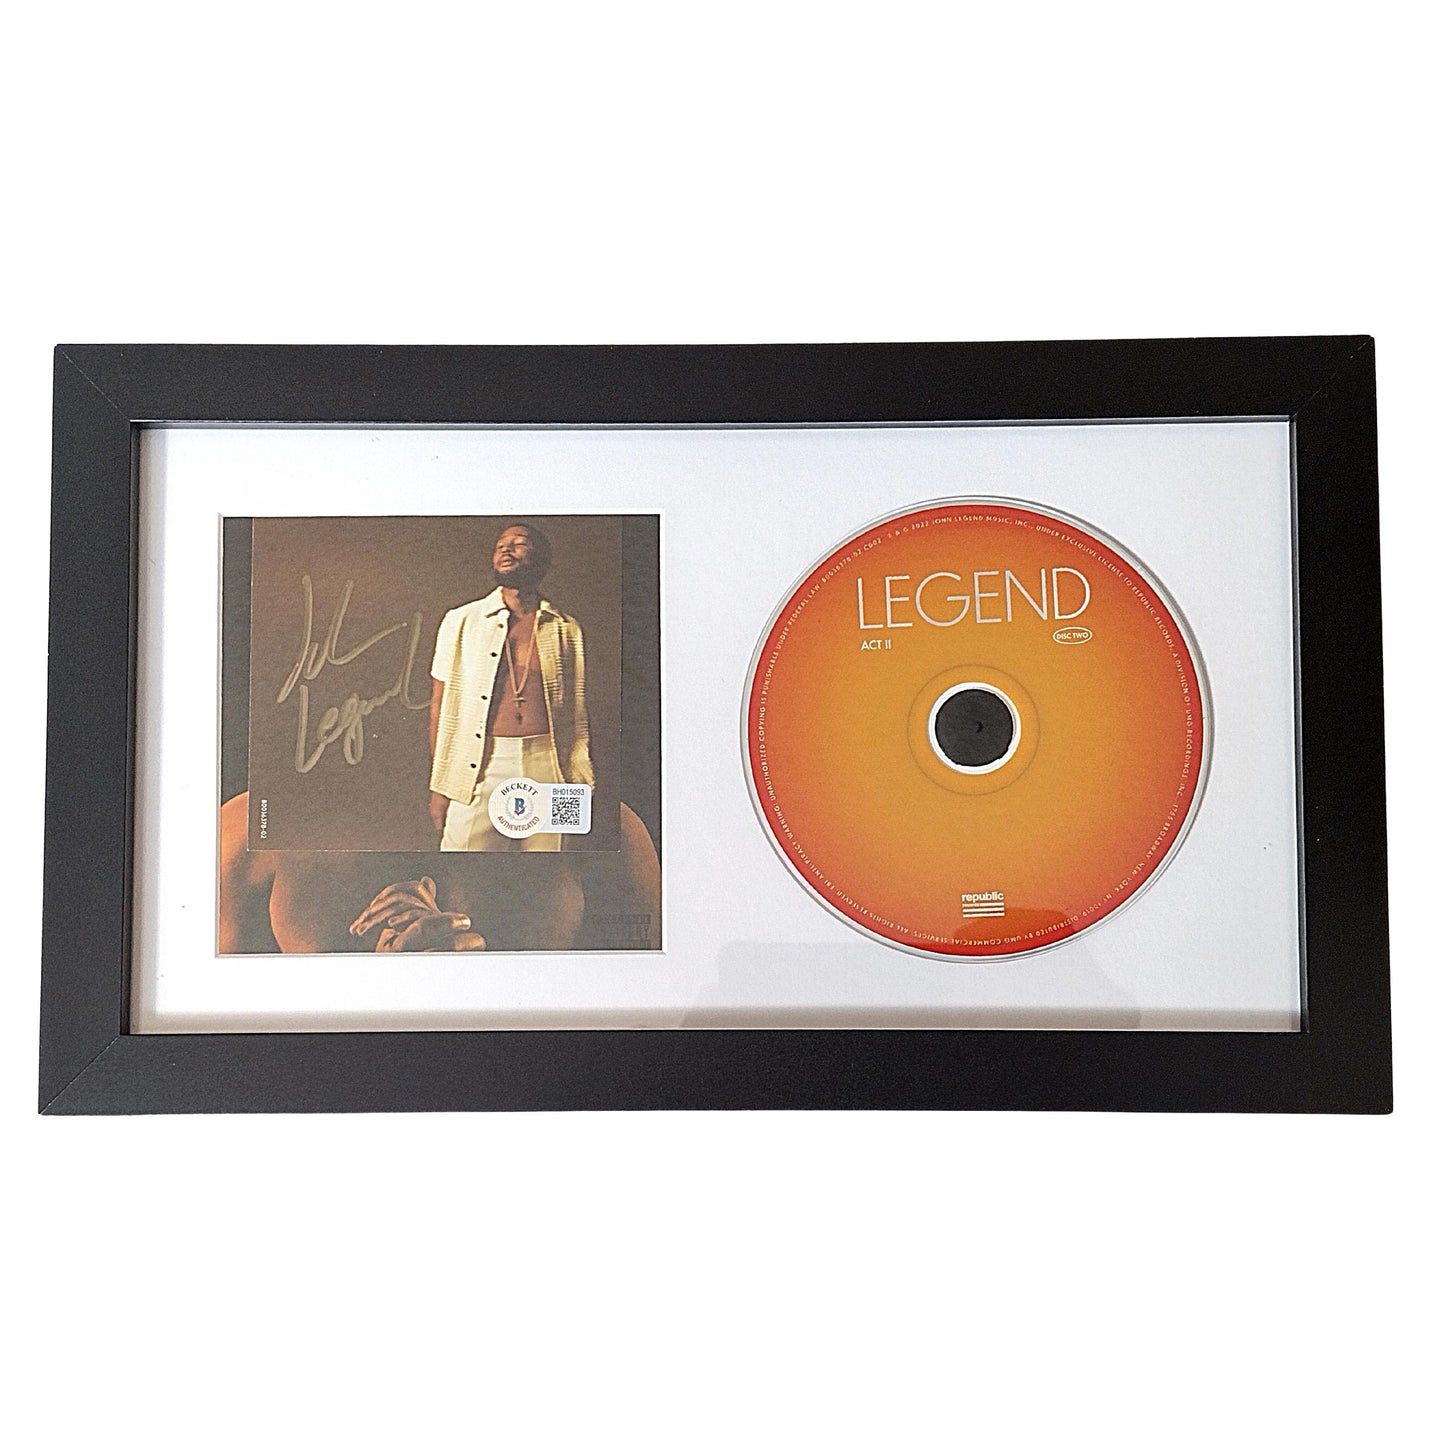 Music- Autographed- John Legend Signed Legend Compact Disc Insert with Framed and Matted CD Wall Display Beckett Certified 201